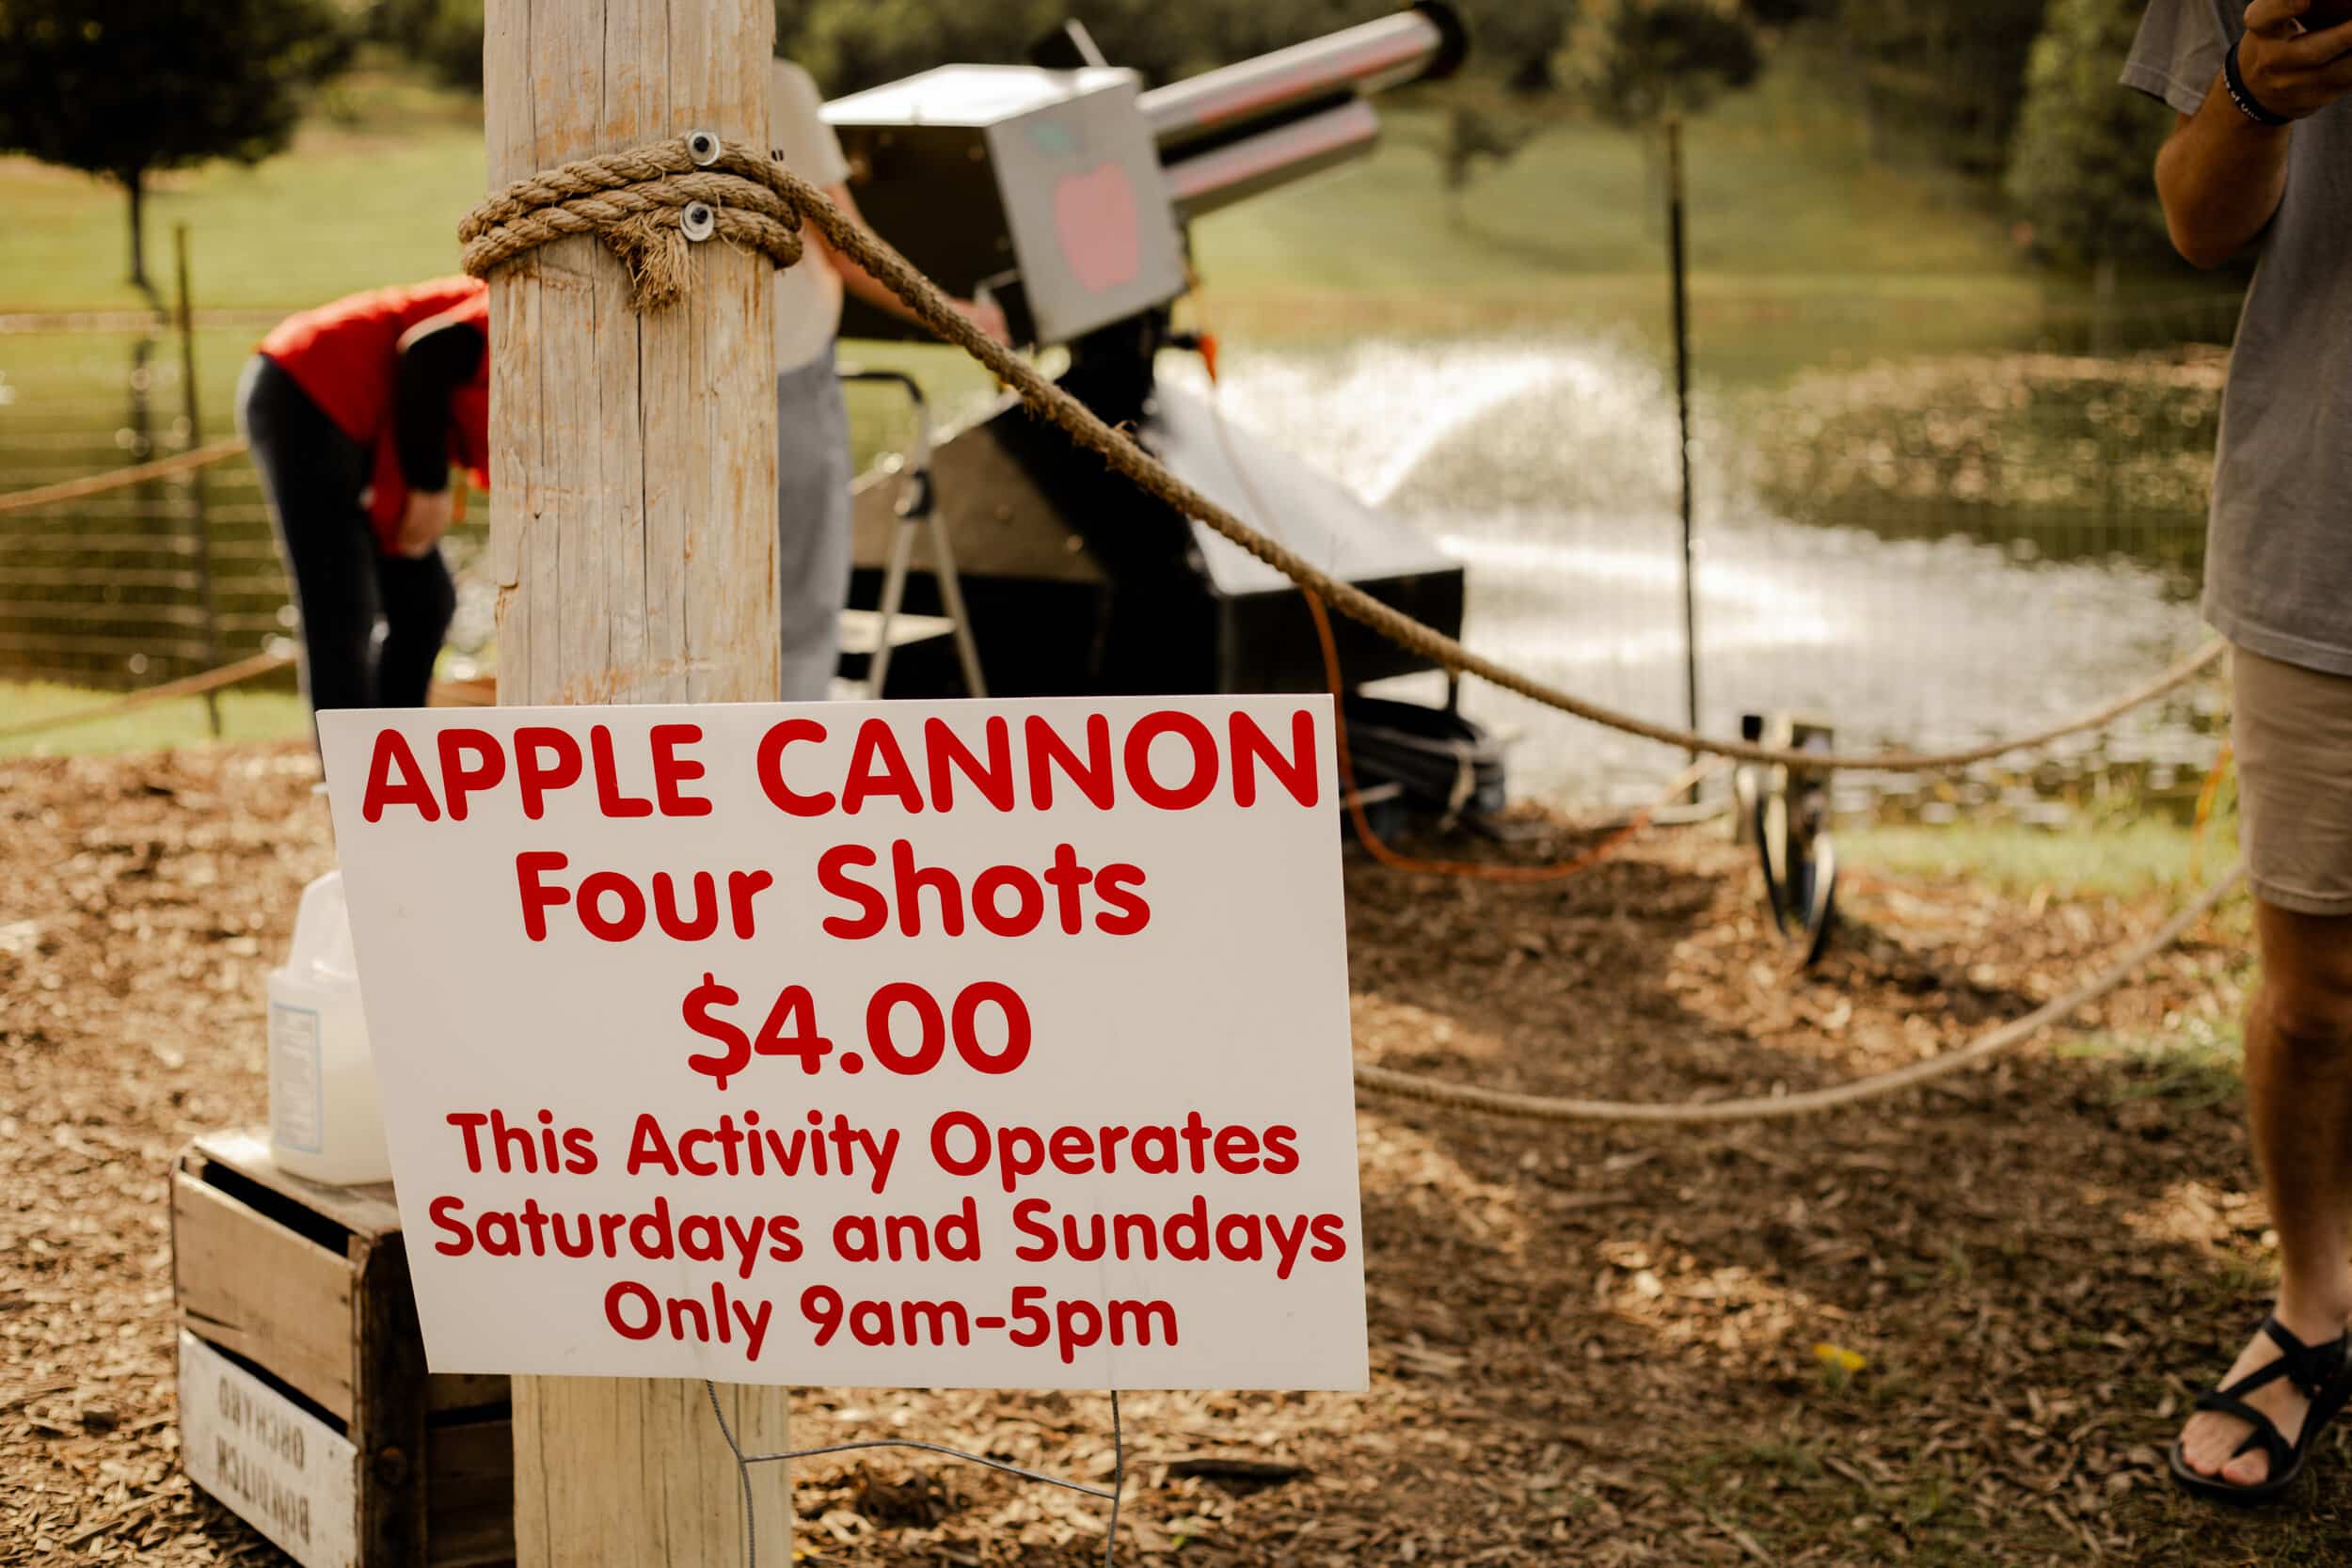 The apple cannon is a unique attraction that is very popular at Grandads. But get there early because the line fills up fast.